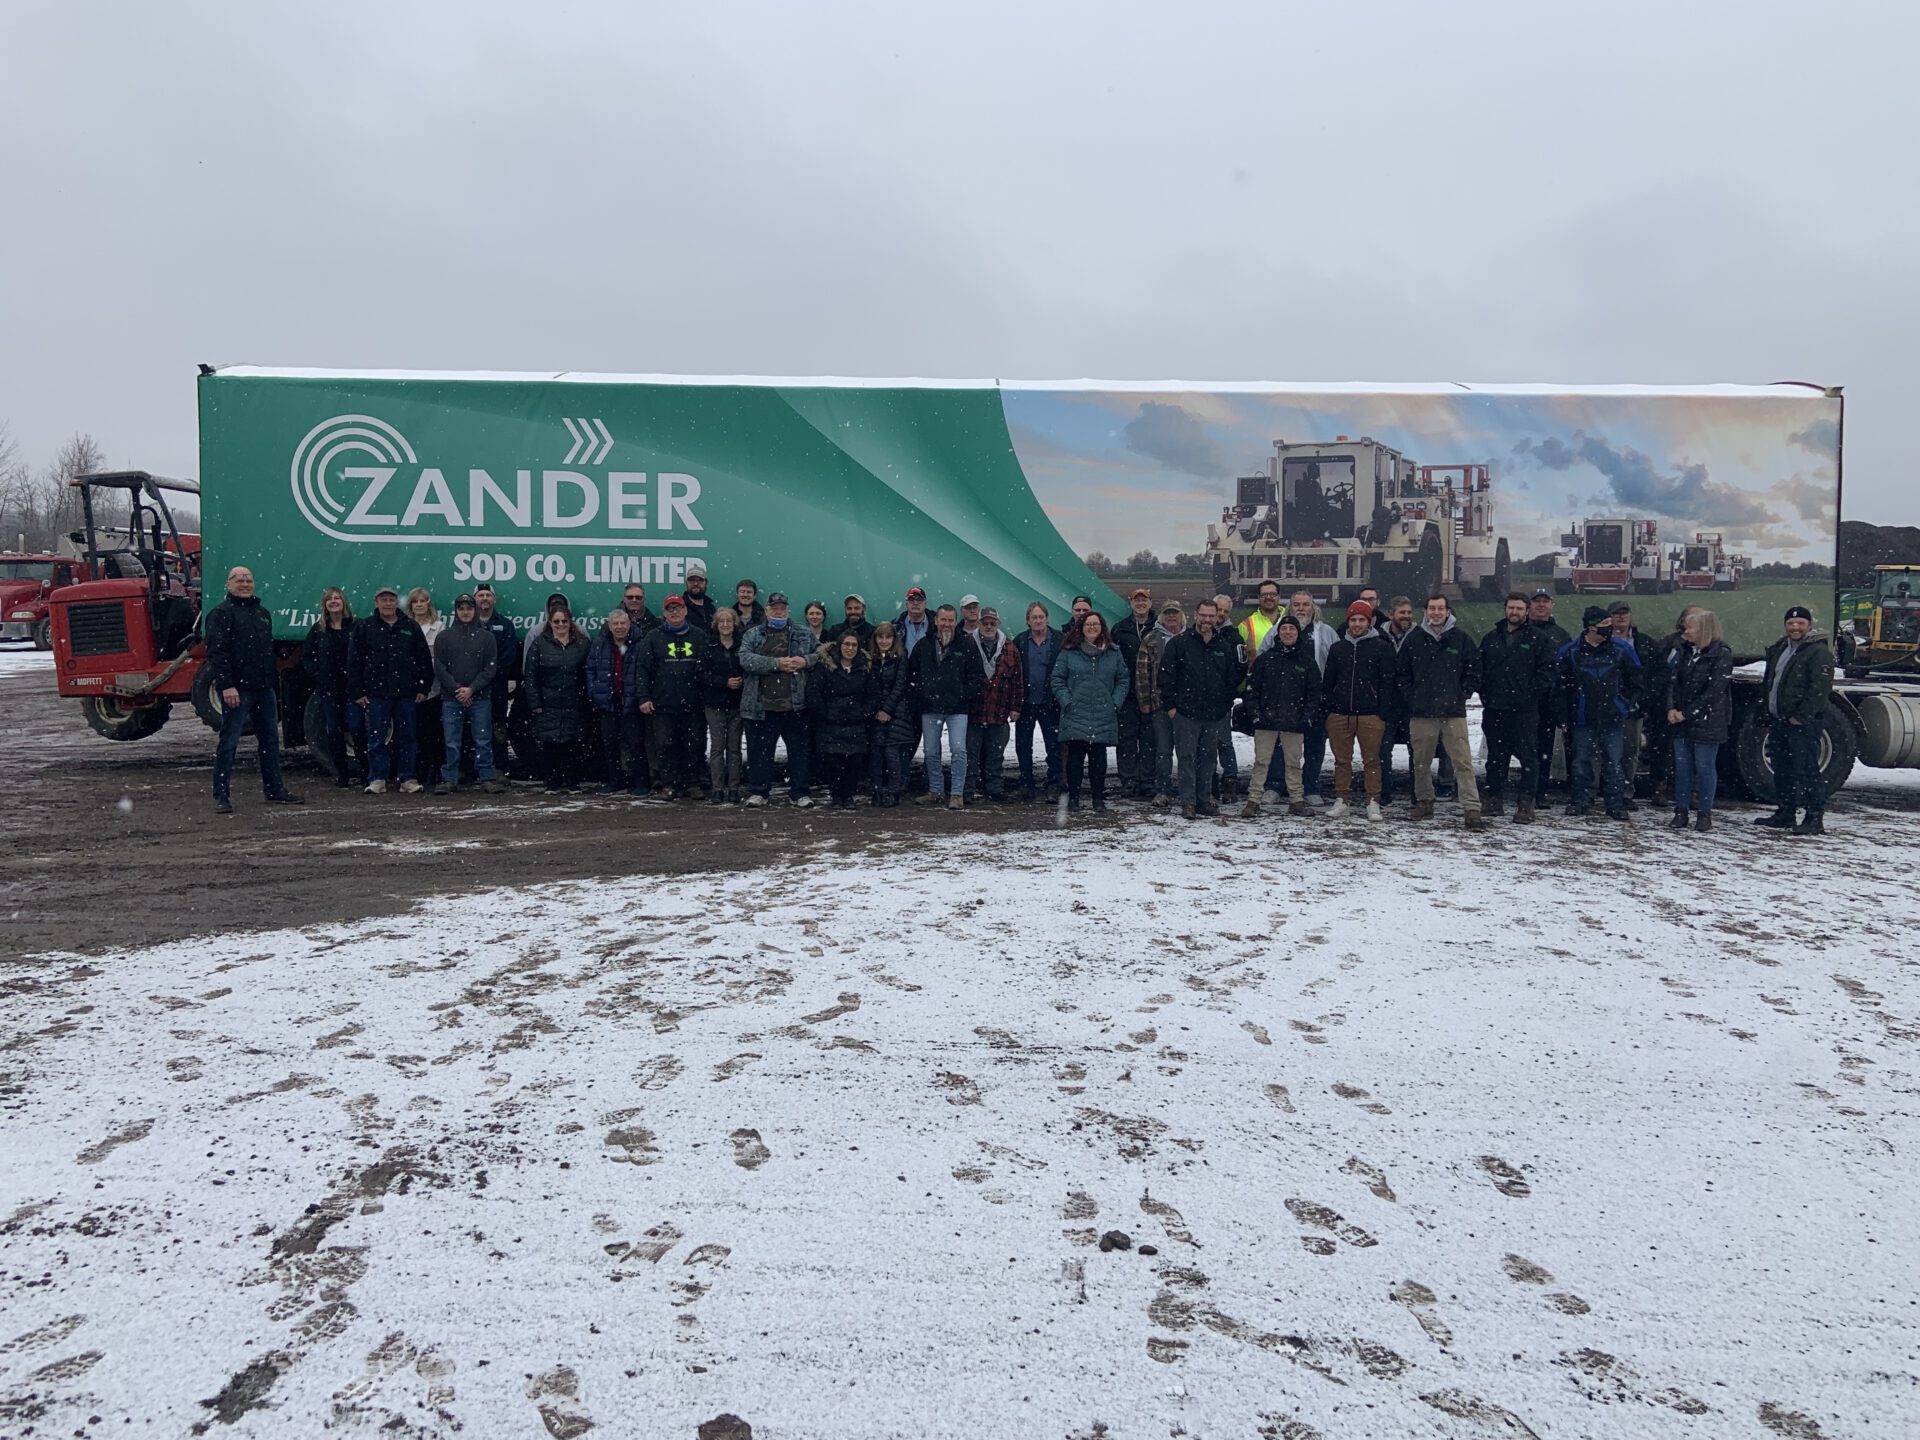 A group of people stands in front of a large trailer with "ZANDER SOD CO. LIMITED" branding, with snow on the ground and cloudy skies overhead.